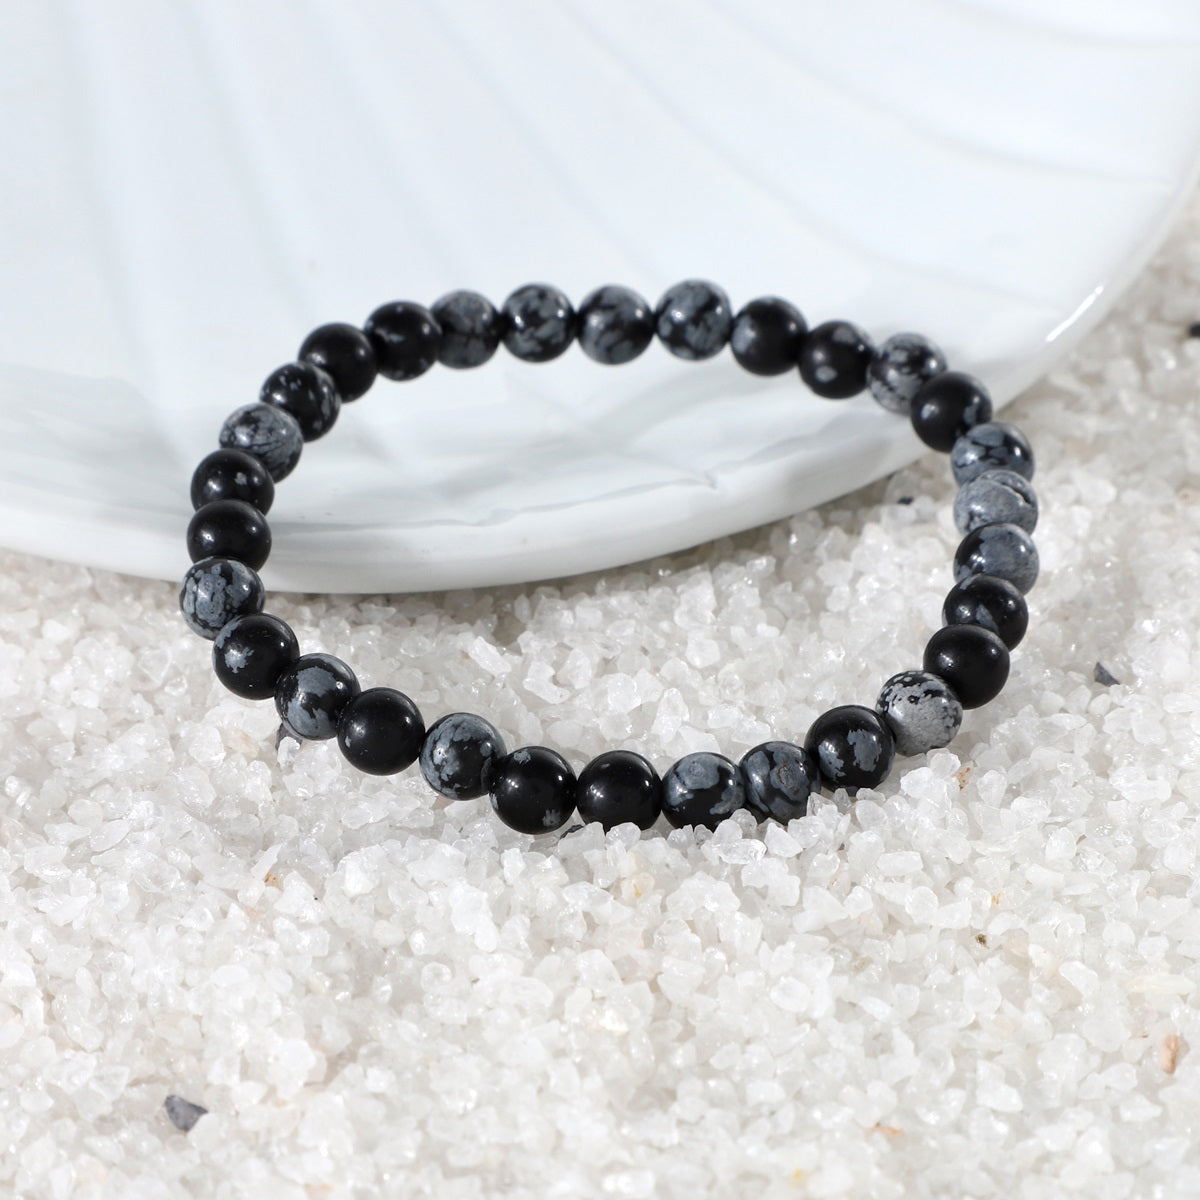 Various styling ideas for the Snowflake Obsidian Bracelet, demonstrating its versatility as a chic accessory with transformative energies of balance and centering